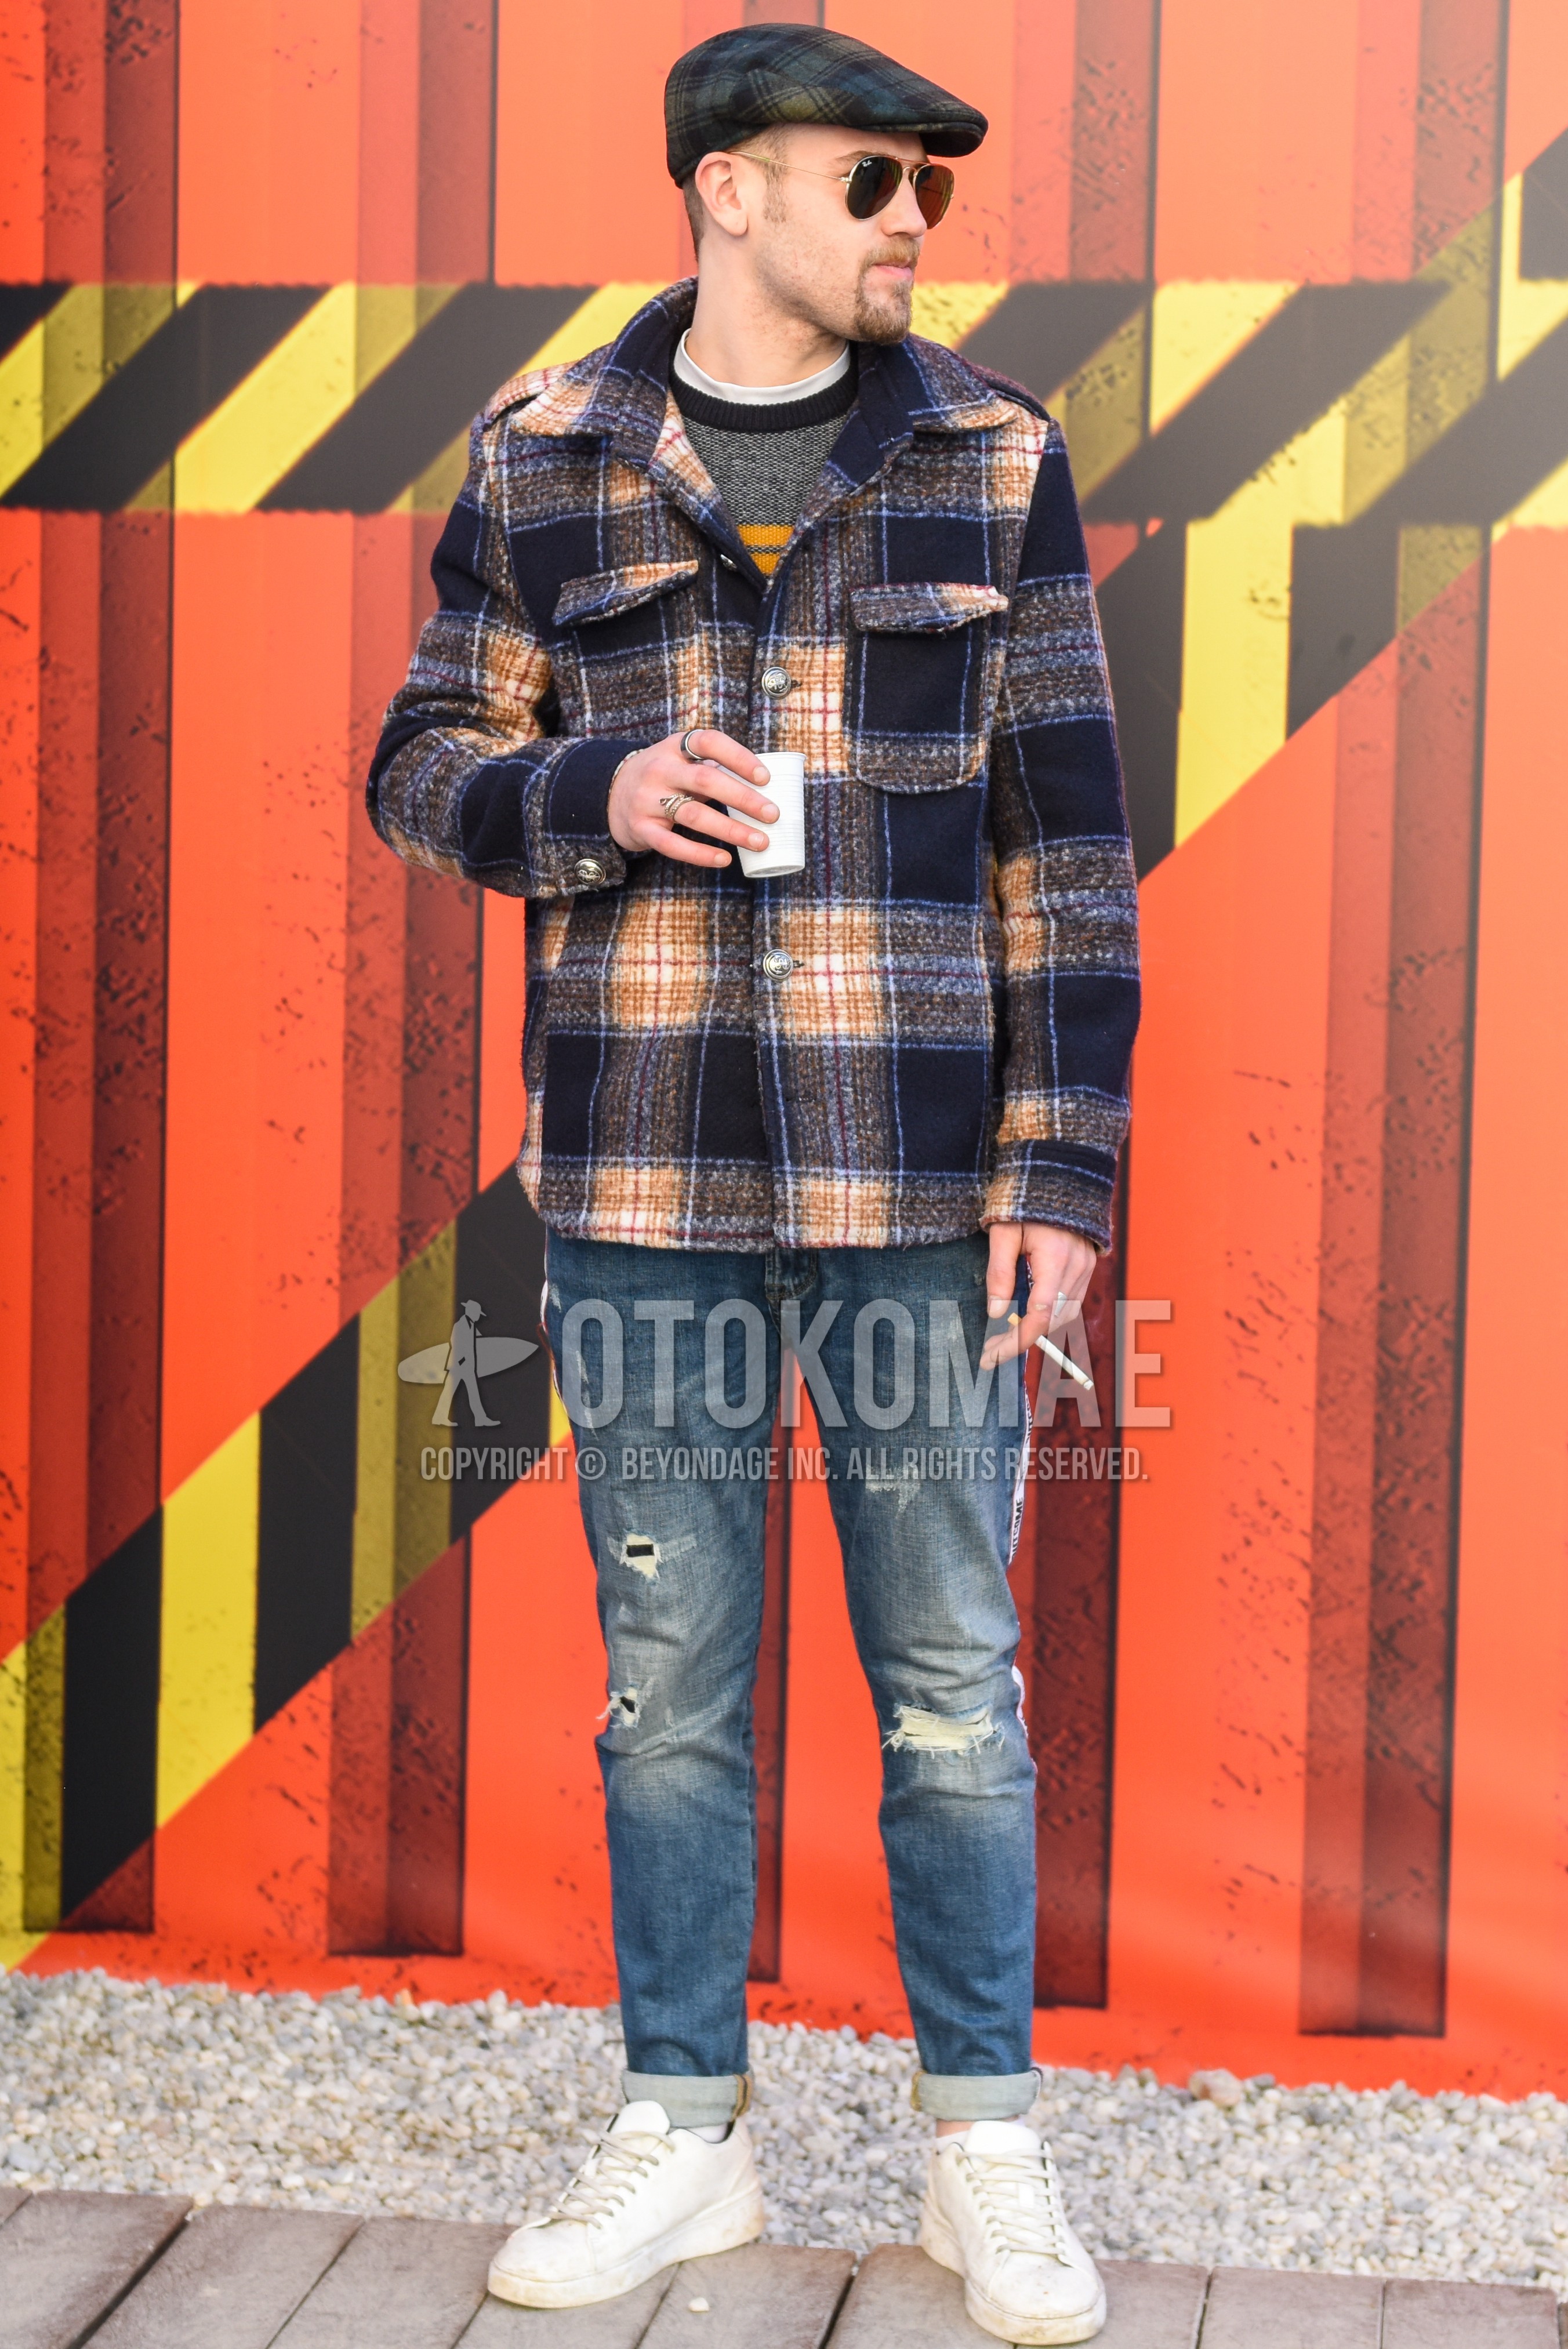 Men's autumn winter outfit with gray check hunting cap, multi-color check shirt jacket, gray graphic sweater, white plain t-shirt, blue plain damaged jeans, white plain socks, white low-cut sneakers.